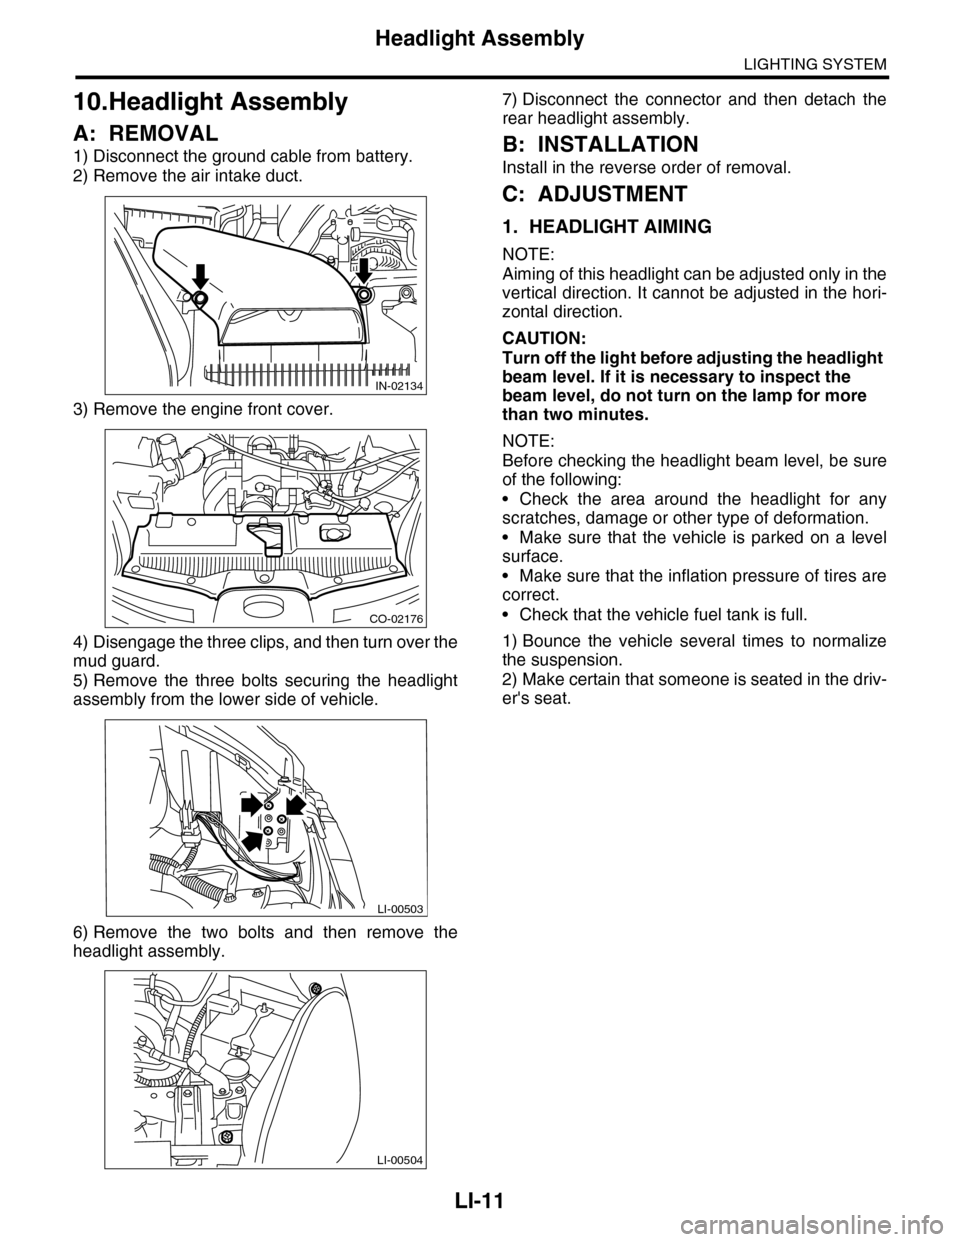 SUBARU TRIBECA 2009 1.G Service Workshop Manual LI-11
Headlight Assembly
LIGHTING SYSTEM
10.Headlight Assembly
A: REMOVAL
1) Disconnect the ground cable from battery.
2) Remove the air intake duct.
3) Remove the engine front cover. 
4) Disengage th